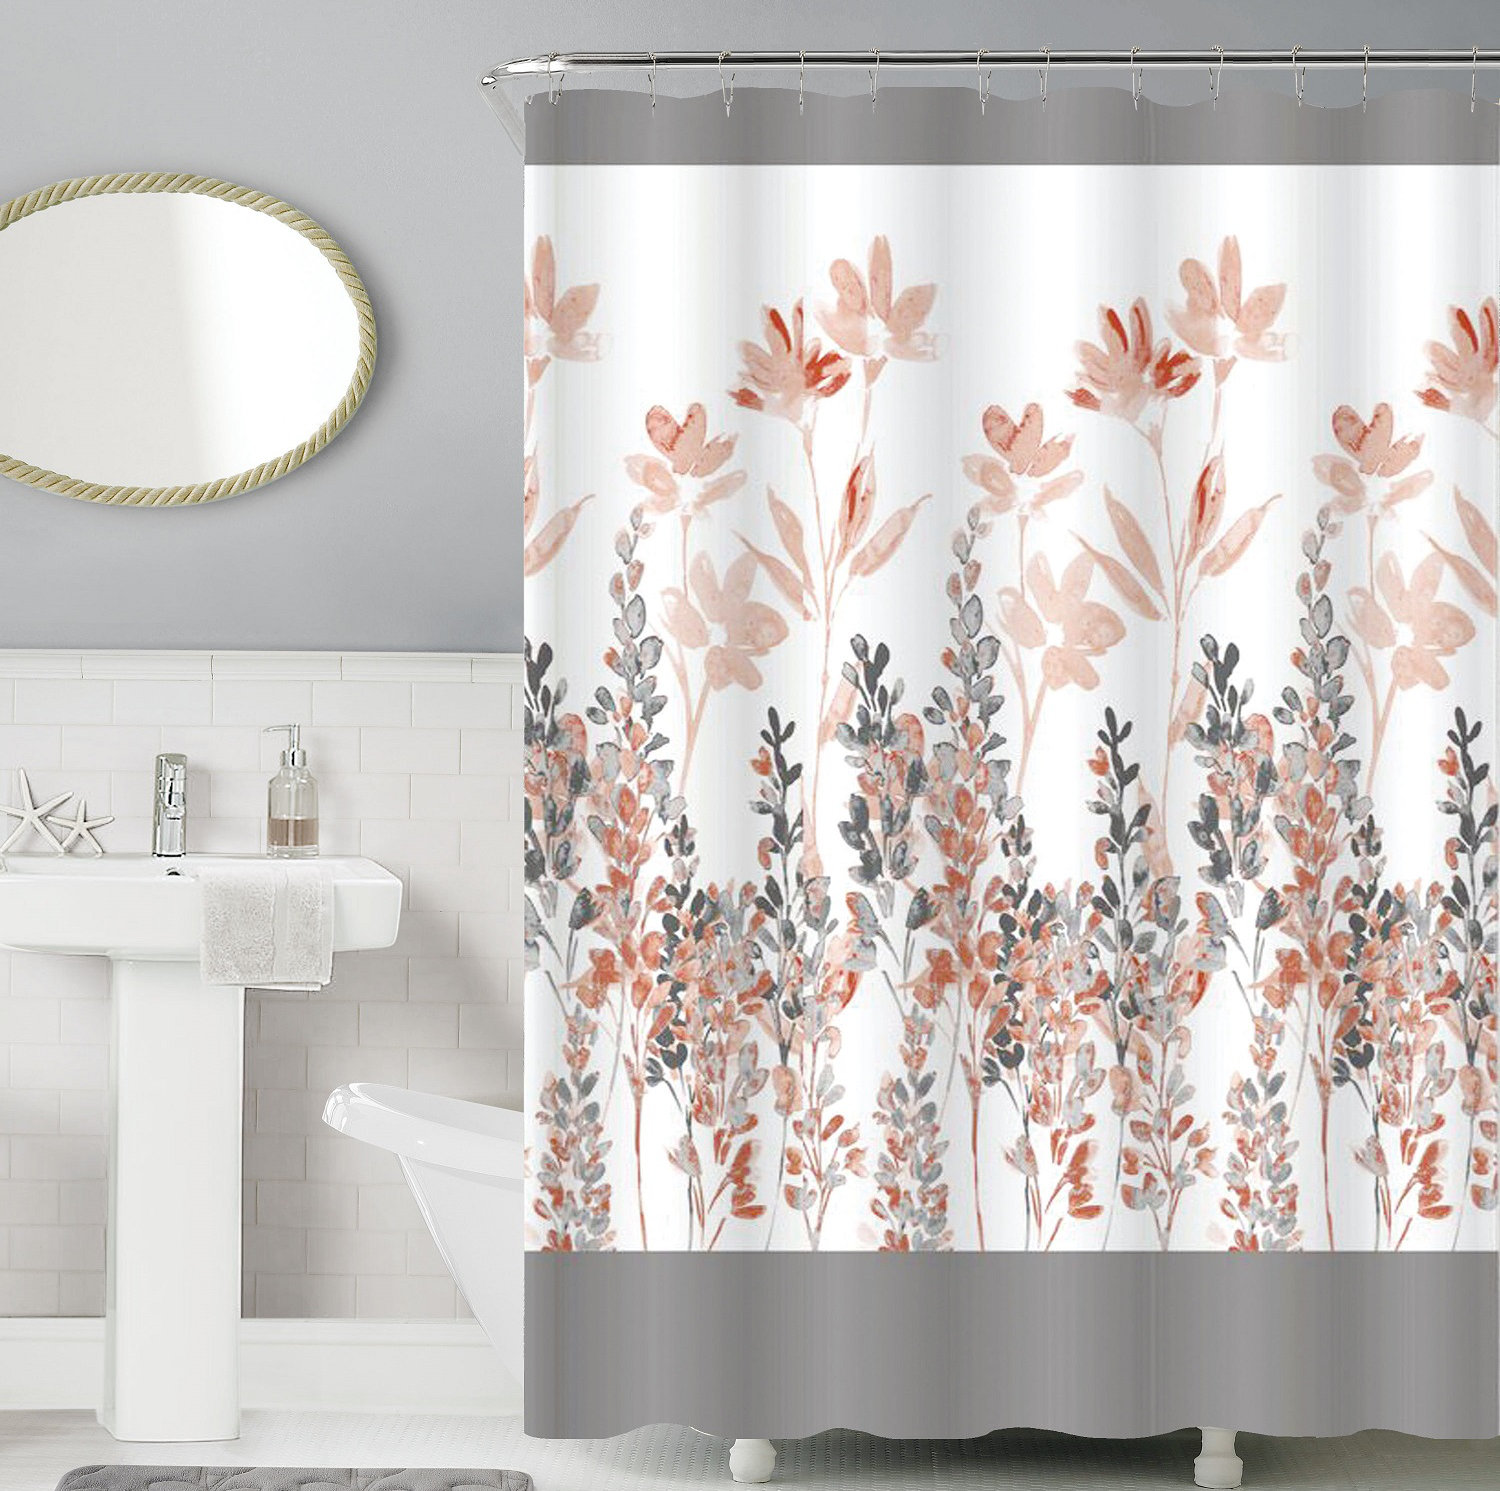 15PC BUTTERFLY PRINT BATHROOM SET 2 BATH MATS 1 SHOWER CURTAIN & WITH RINGS NEW 